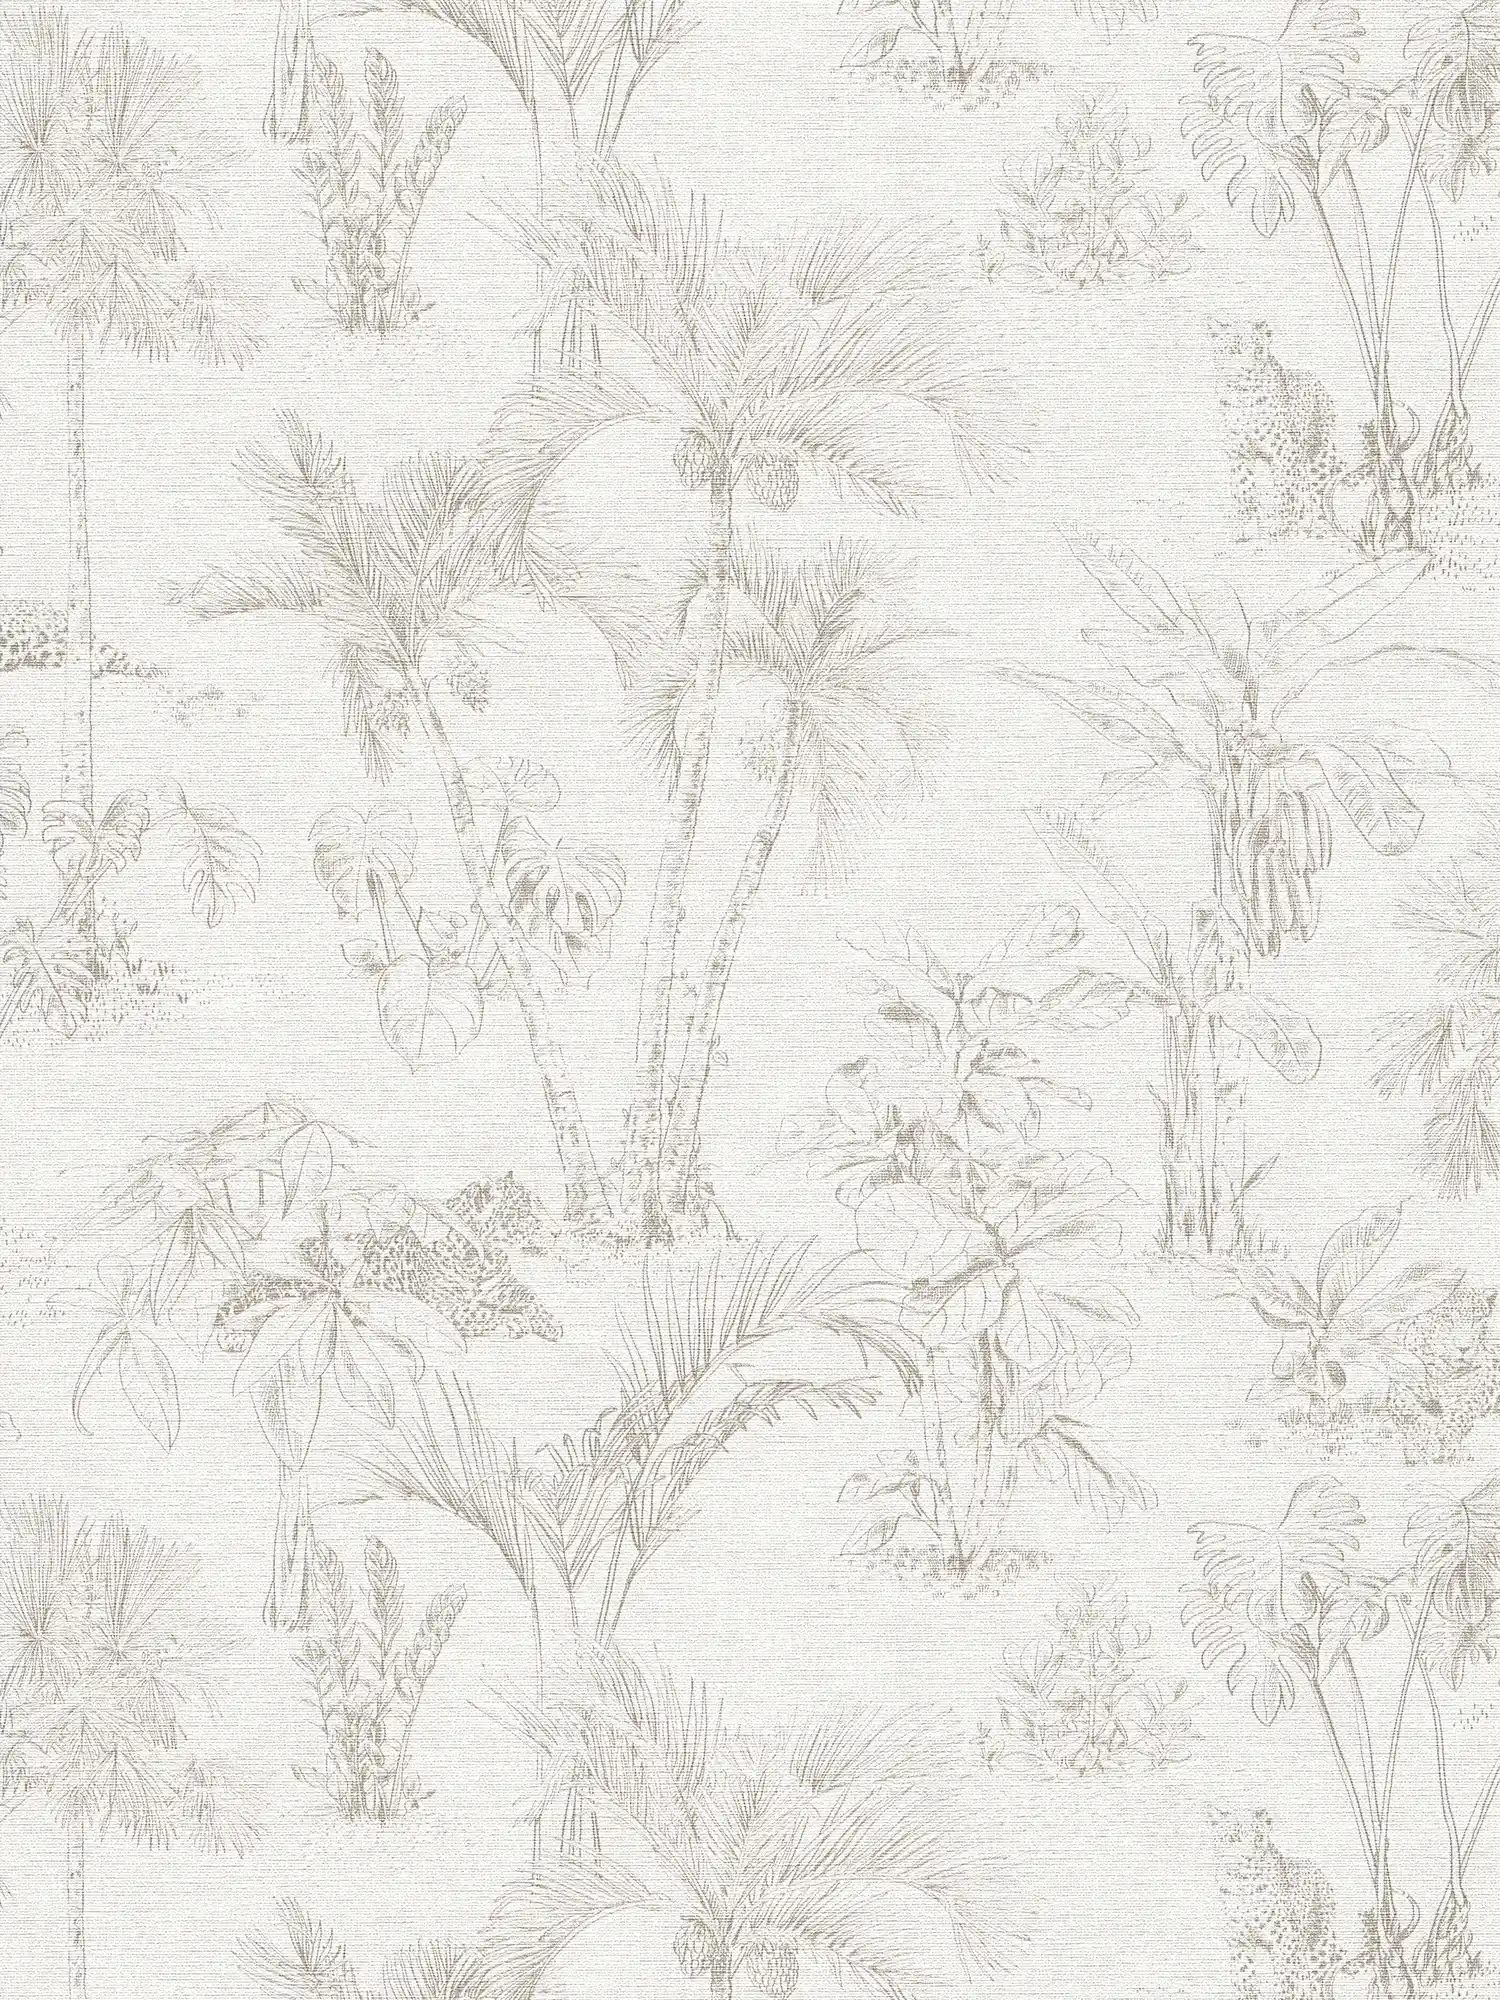 Jungle wallpaper with palm leaves & animal motif - beige, grey
